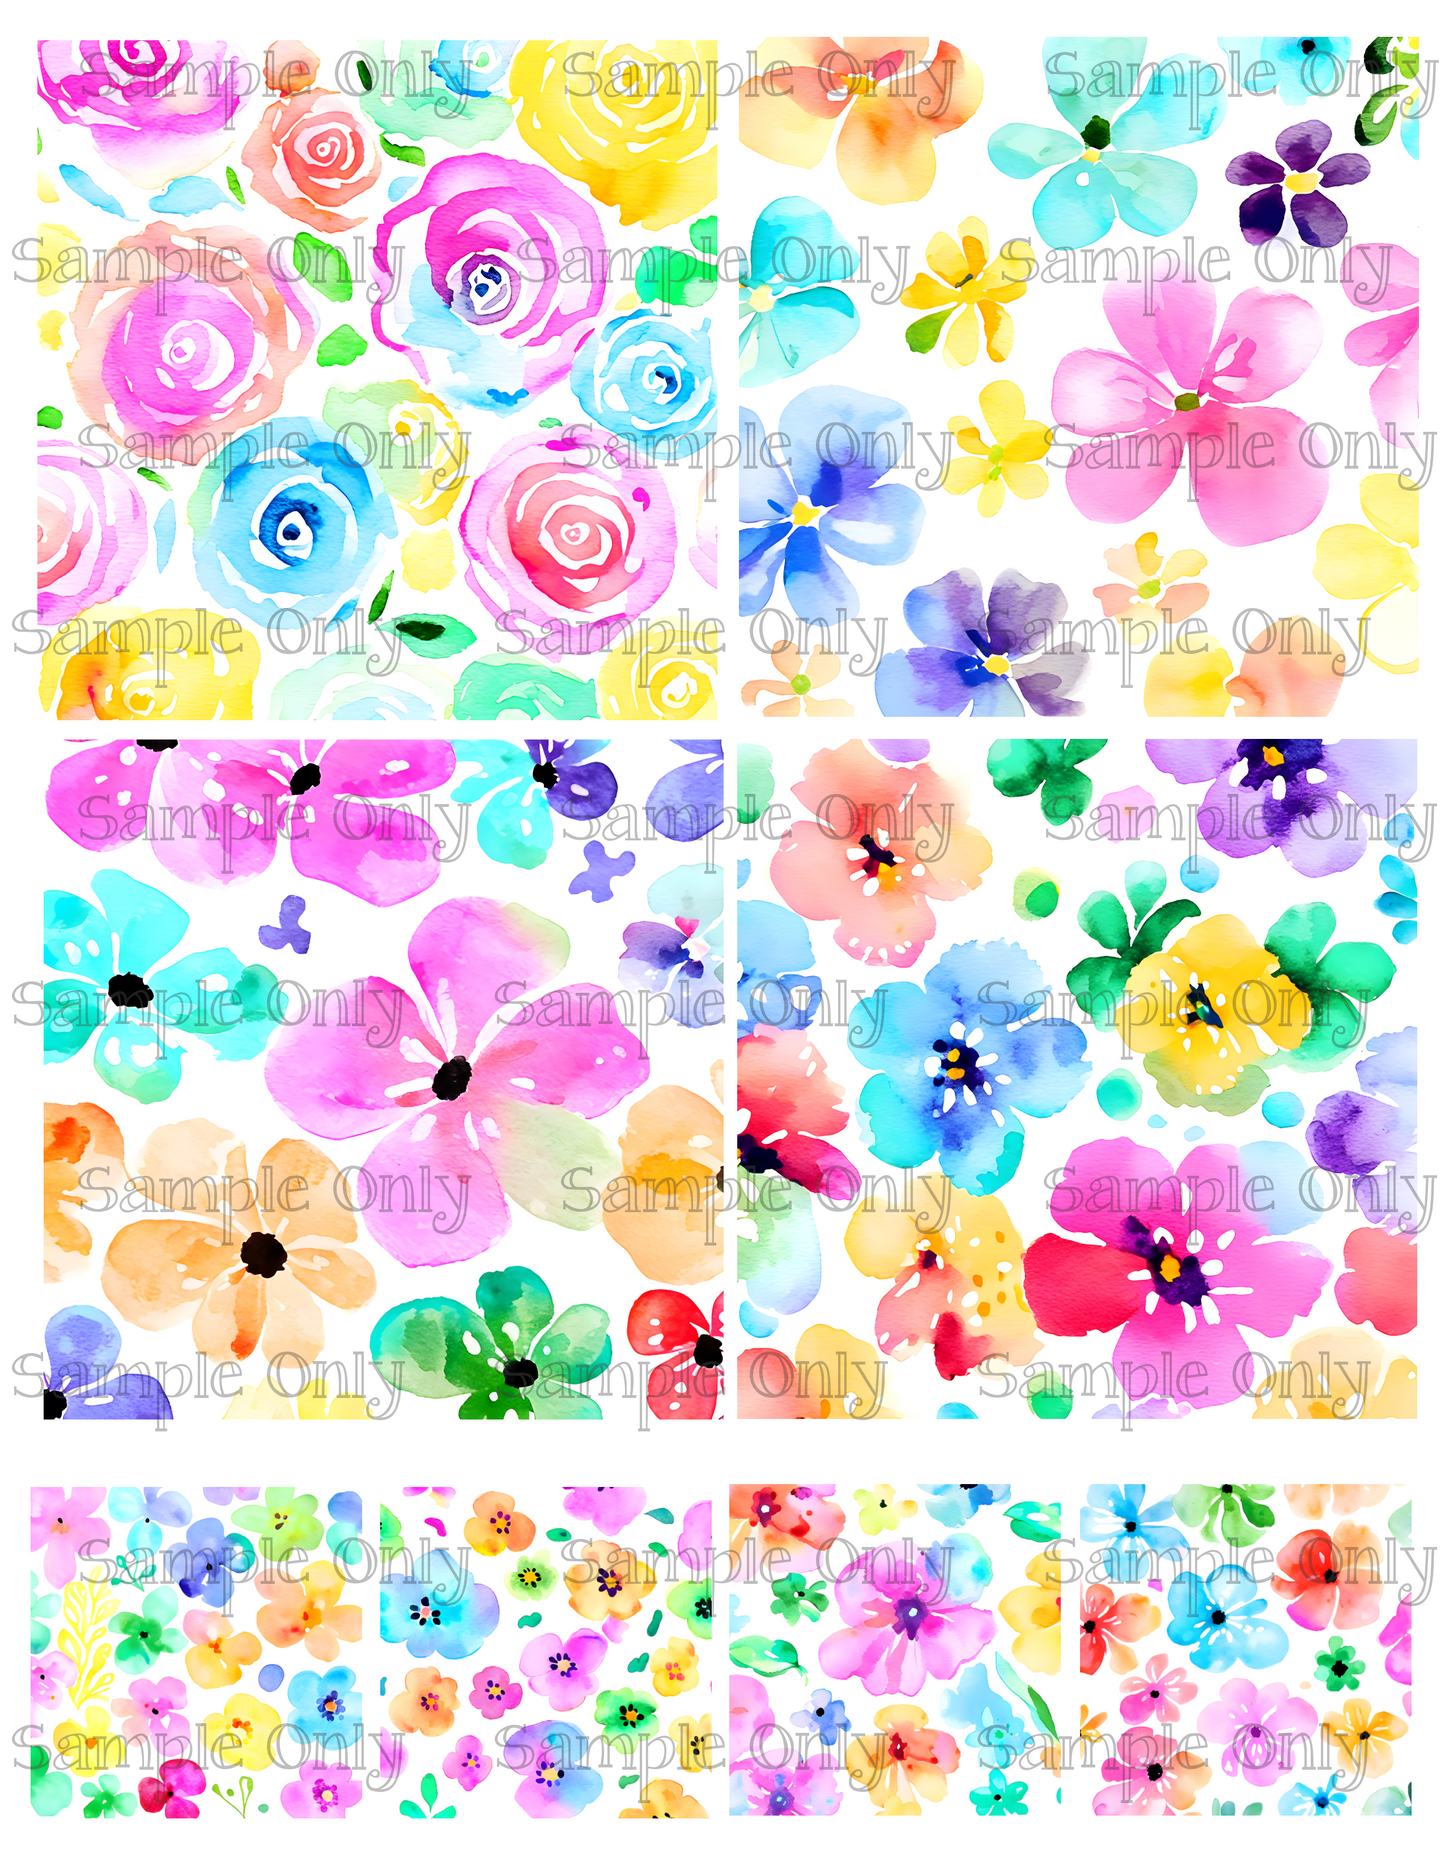 4 Inch Cool Painted Flower Meadow Image Sheet For Polymer Clay Transfer Decal DIGITAL FILE OR PRINTED